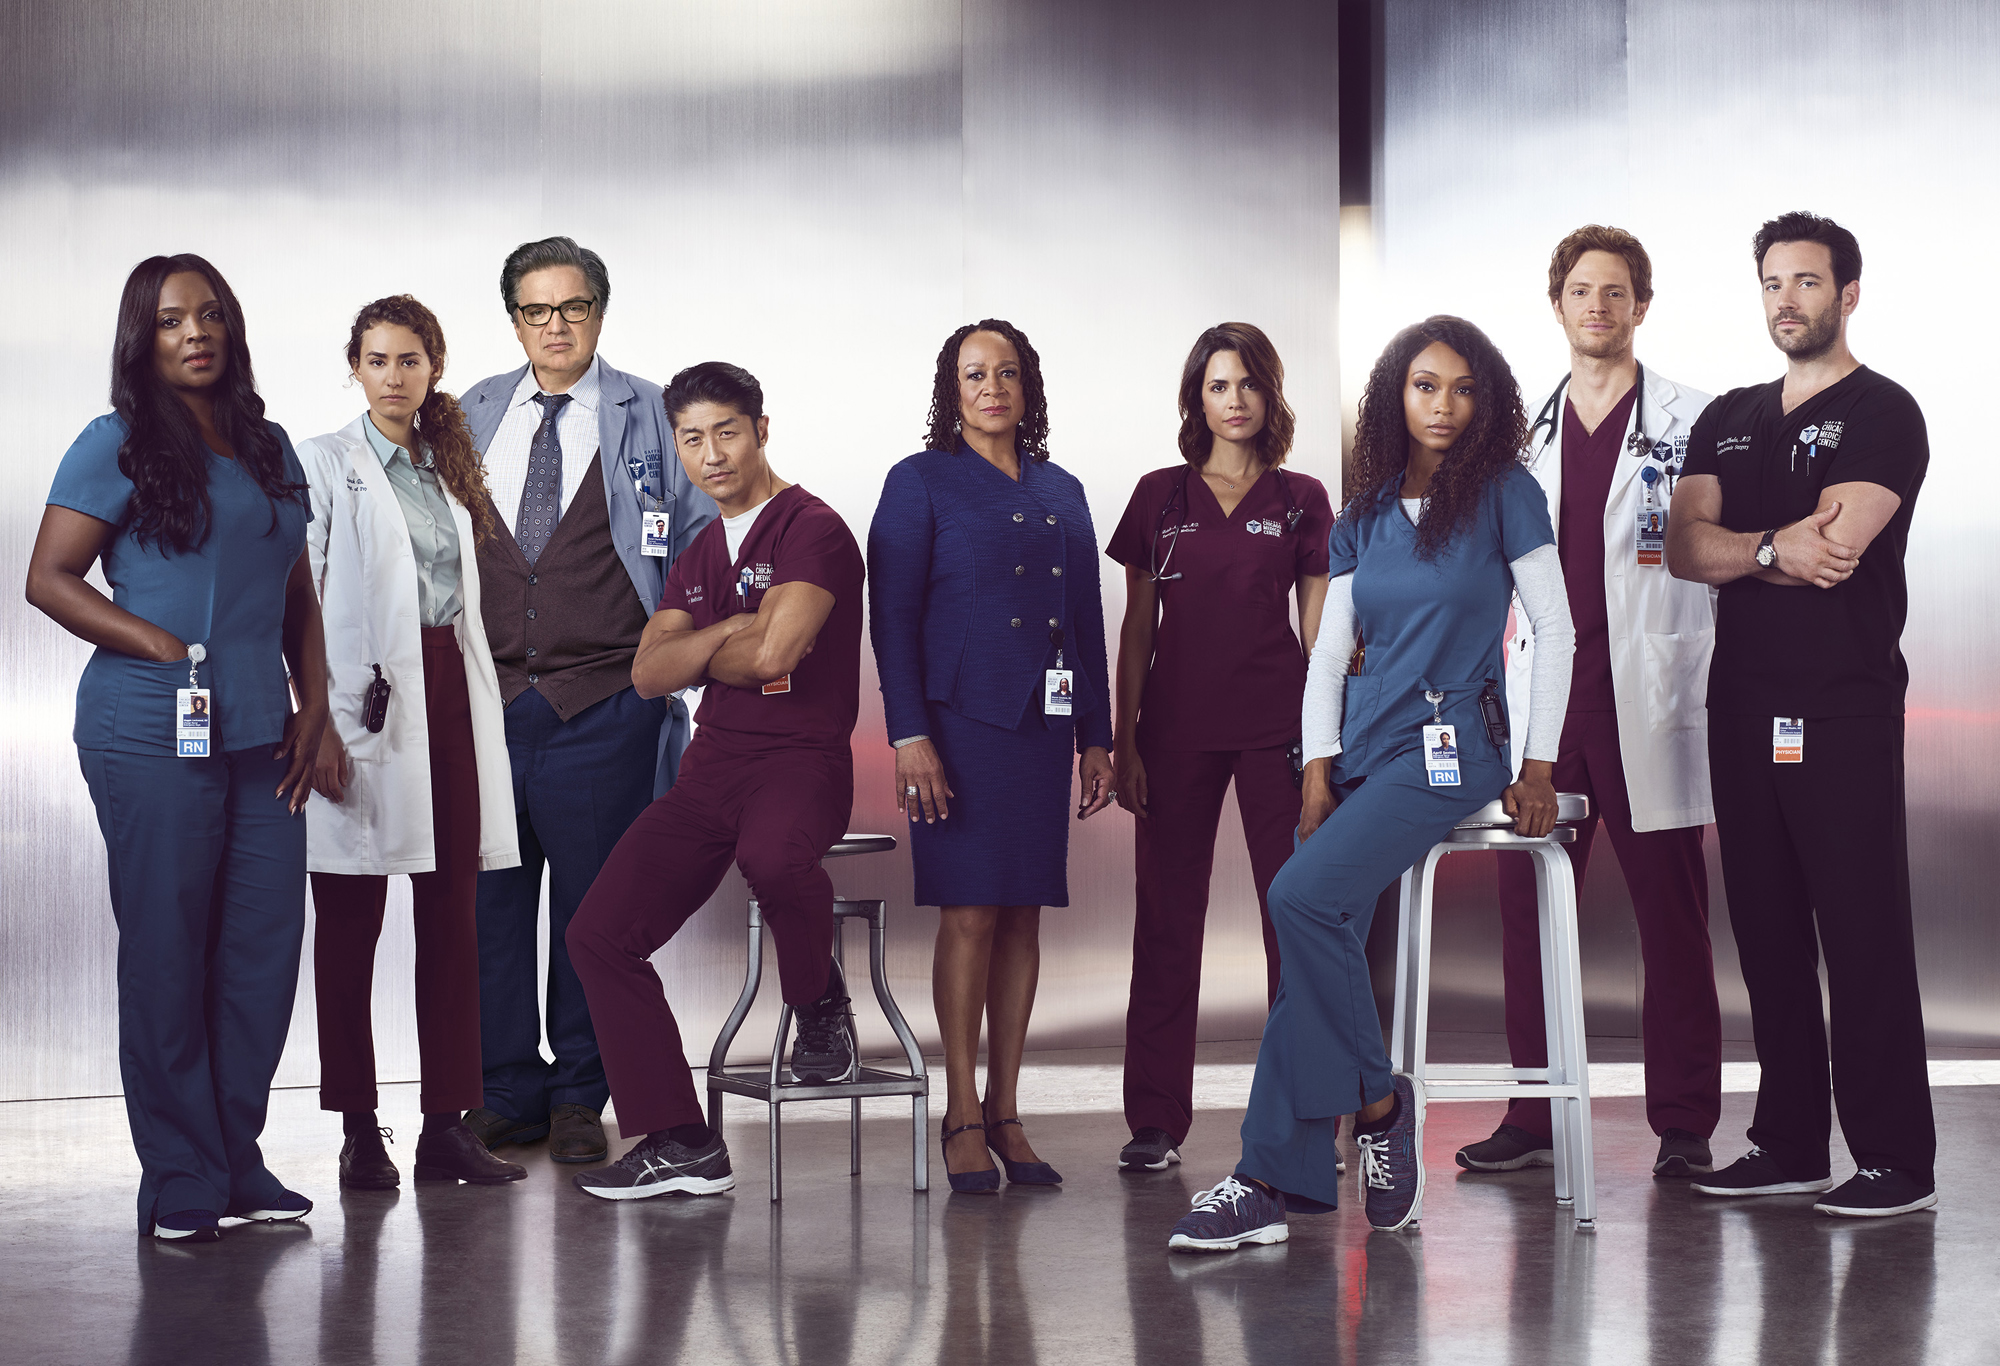 Marlyne Barrett as Maggie Lockwood, Rachel DiPillo as Sarah Reese, Oliver Platt as Dr. Daniel Charles, Brian Tee as Dr. Ethan Choi, S. Epatha Merkerson as Sharon Goodwin, Torrey DeVitto as Dr. Natalie Manning, Yaya DaCaosta as April Sexton, Nick Gehlfuss as Dr. Will Halstead, Colin Donnell as Dr. Connor Rhodes in 'Chicago Med' Season 3